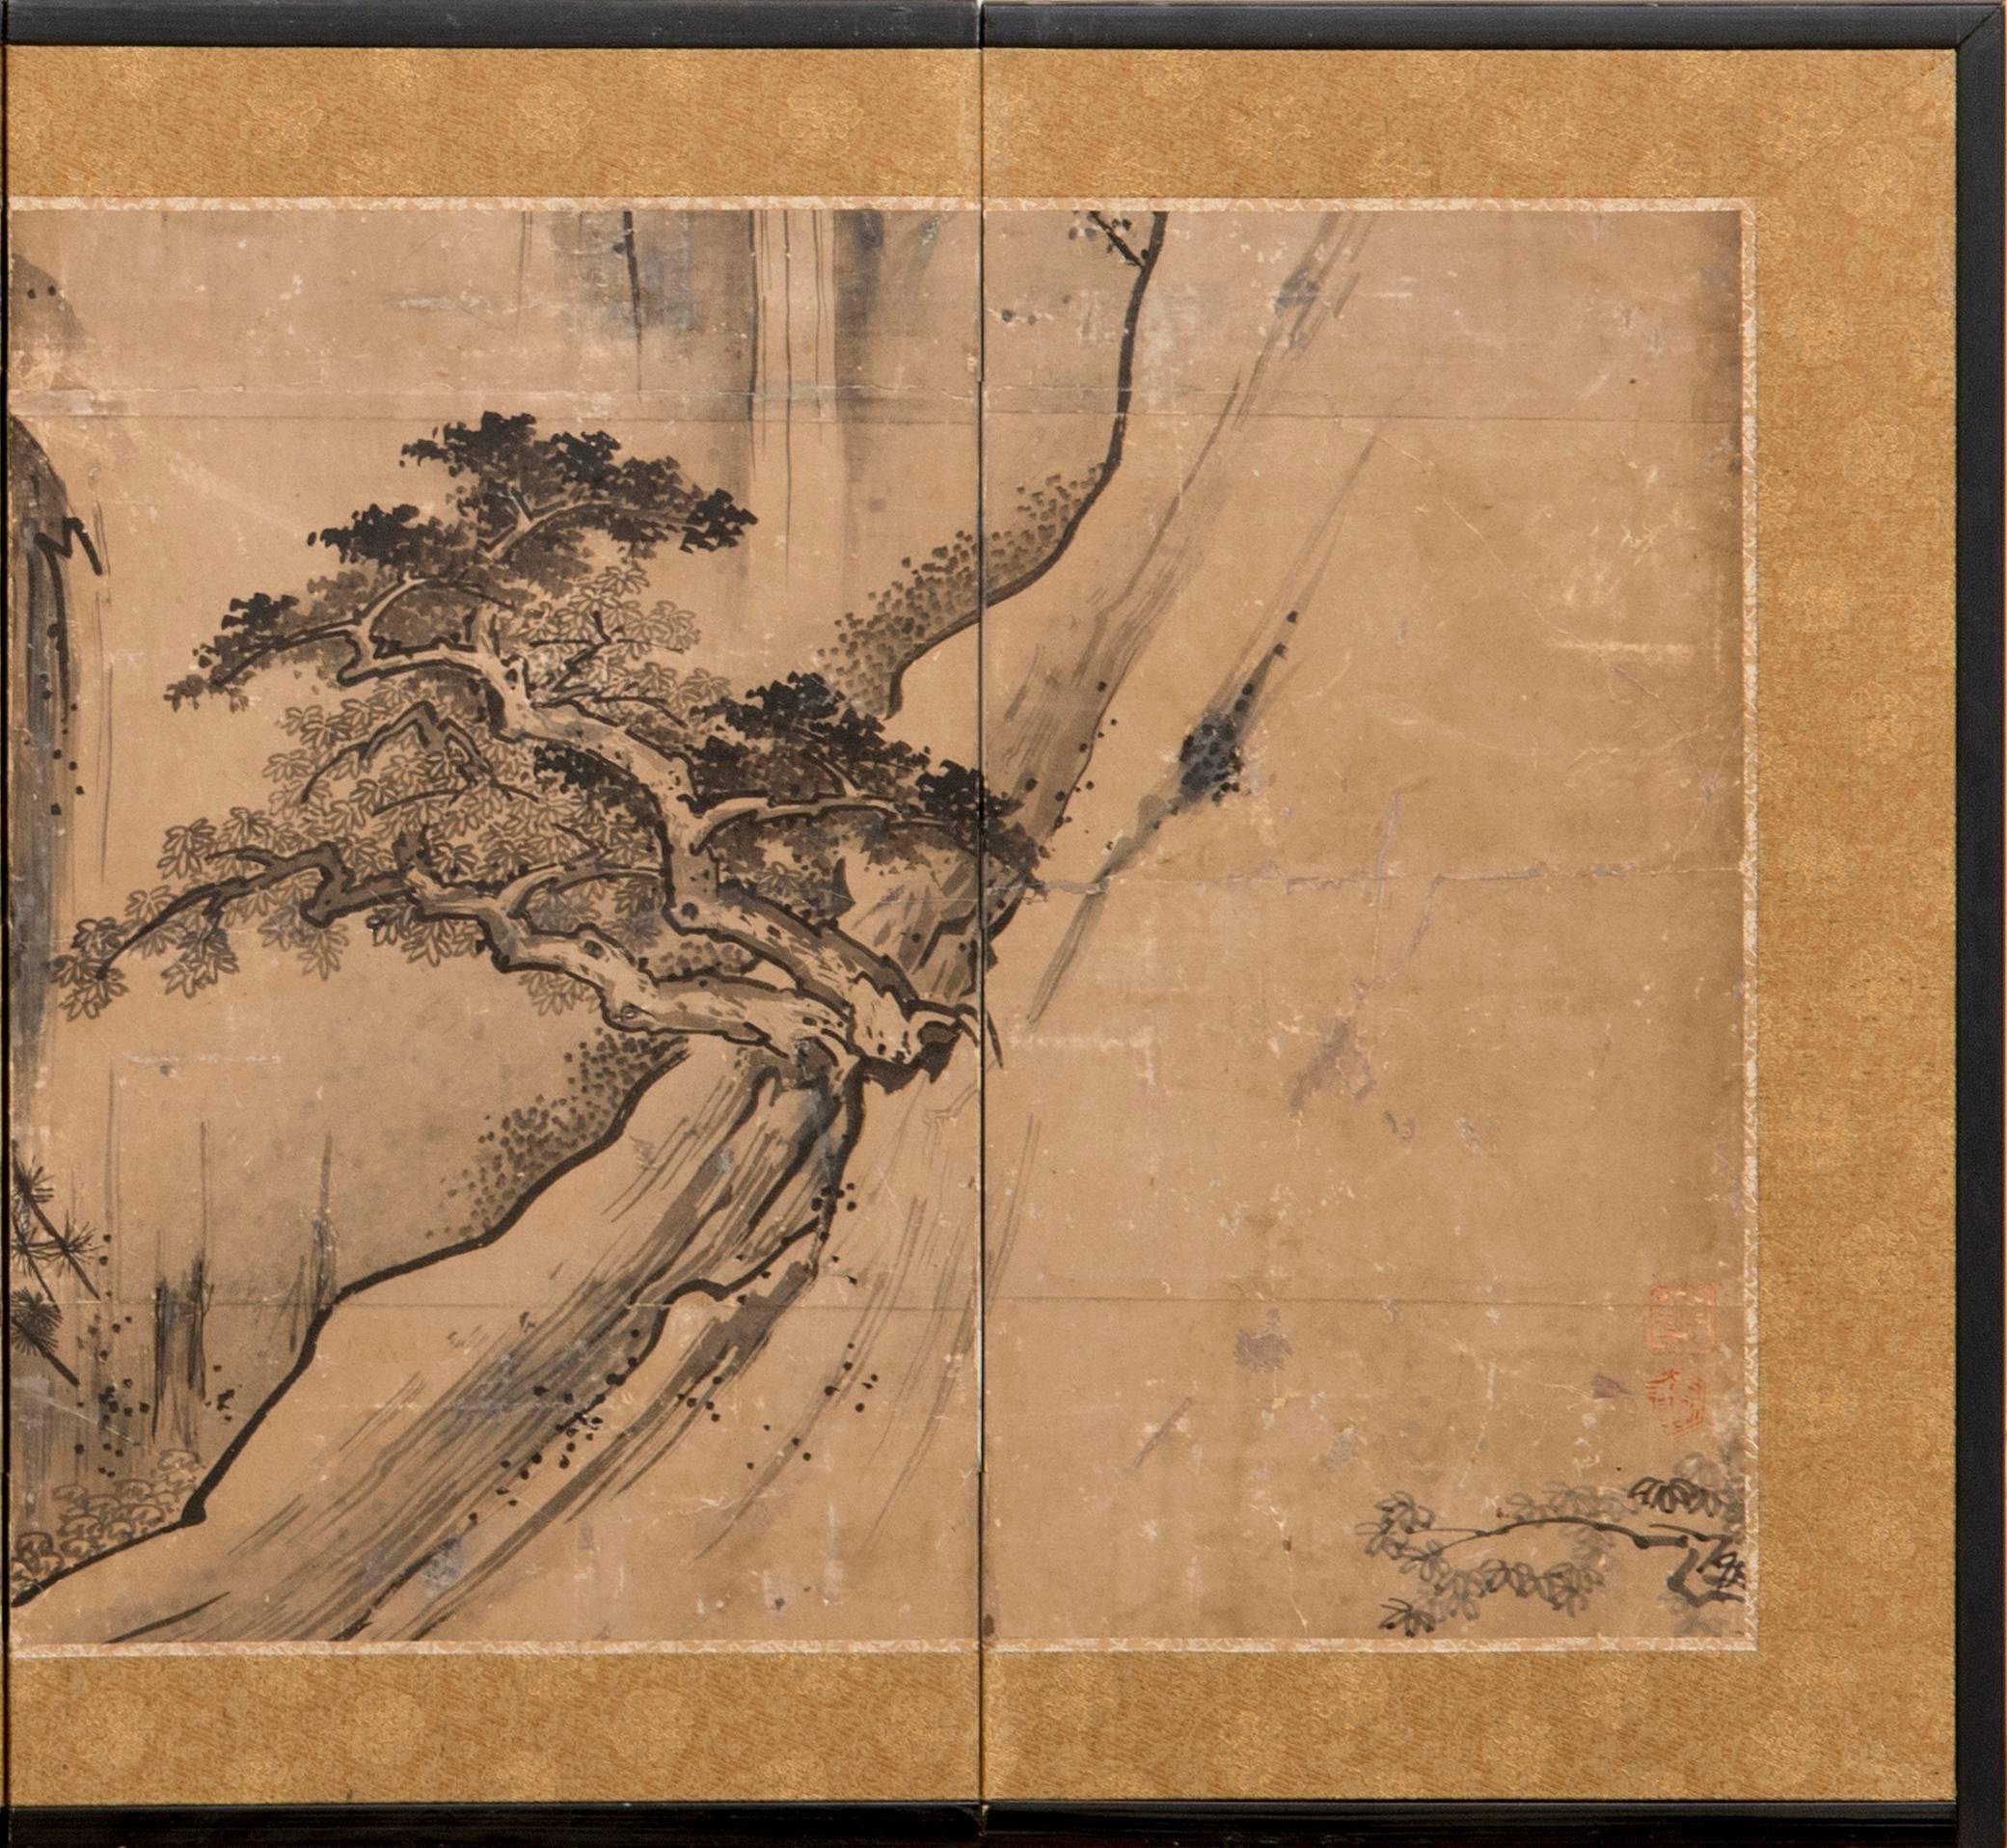 Antique Japanese Four Panel Screen: Ink Landscape Painting with an illegible seal.  Painted in the Unkoku School in ink on mulberry paper with a silk brocade border.